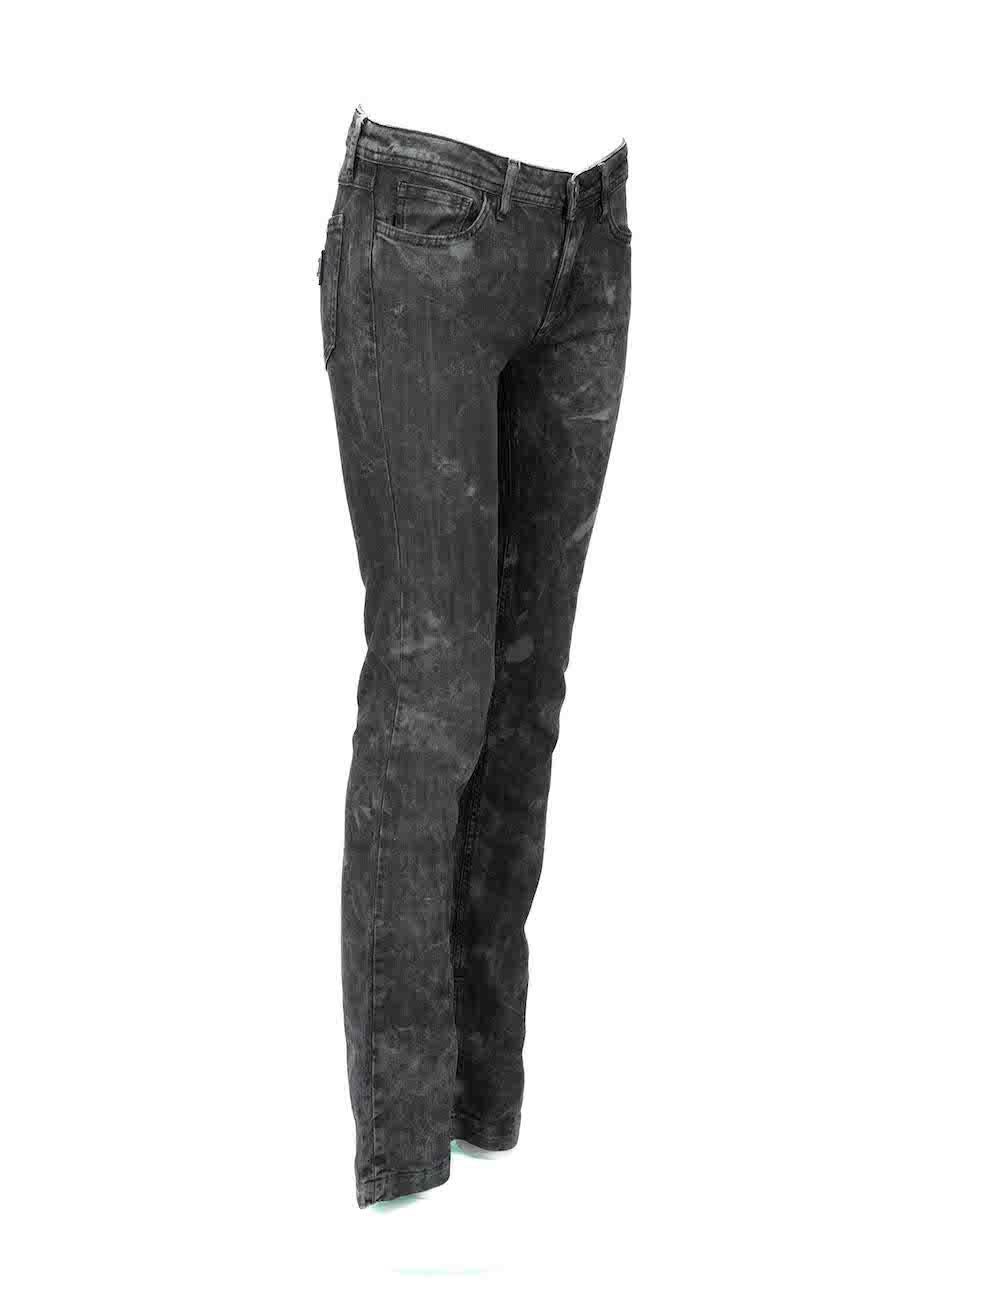 CONDITION is Very good. Hardly any visible wear to jeans is evident on this used Dolce & Gabbana designer resale item. Please note that the tarnishing to metal plate on back right pocket is intentional.
 
Details
Black
Cotton denim
Jeans
Straight